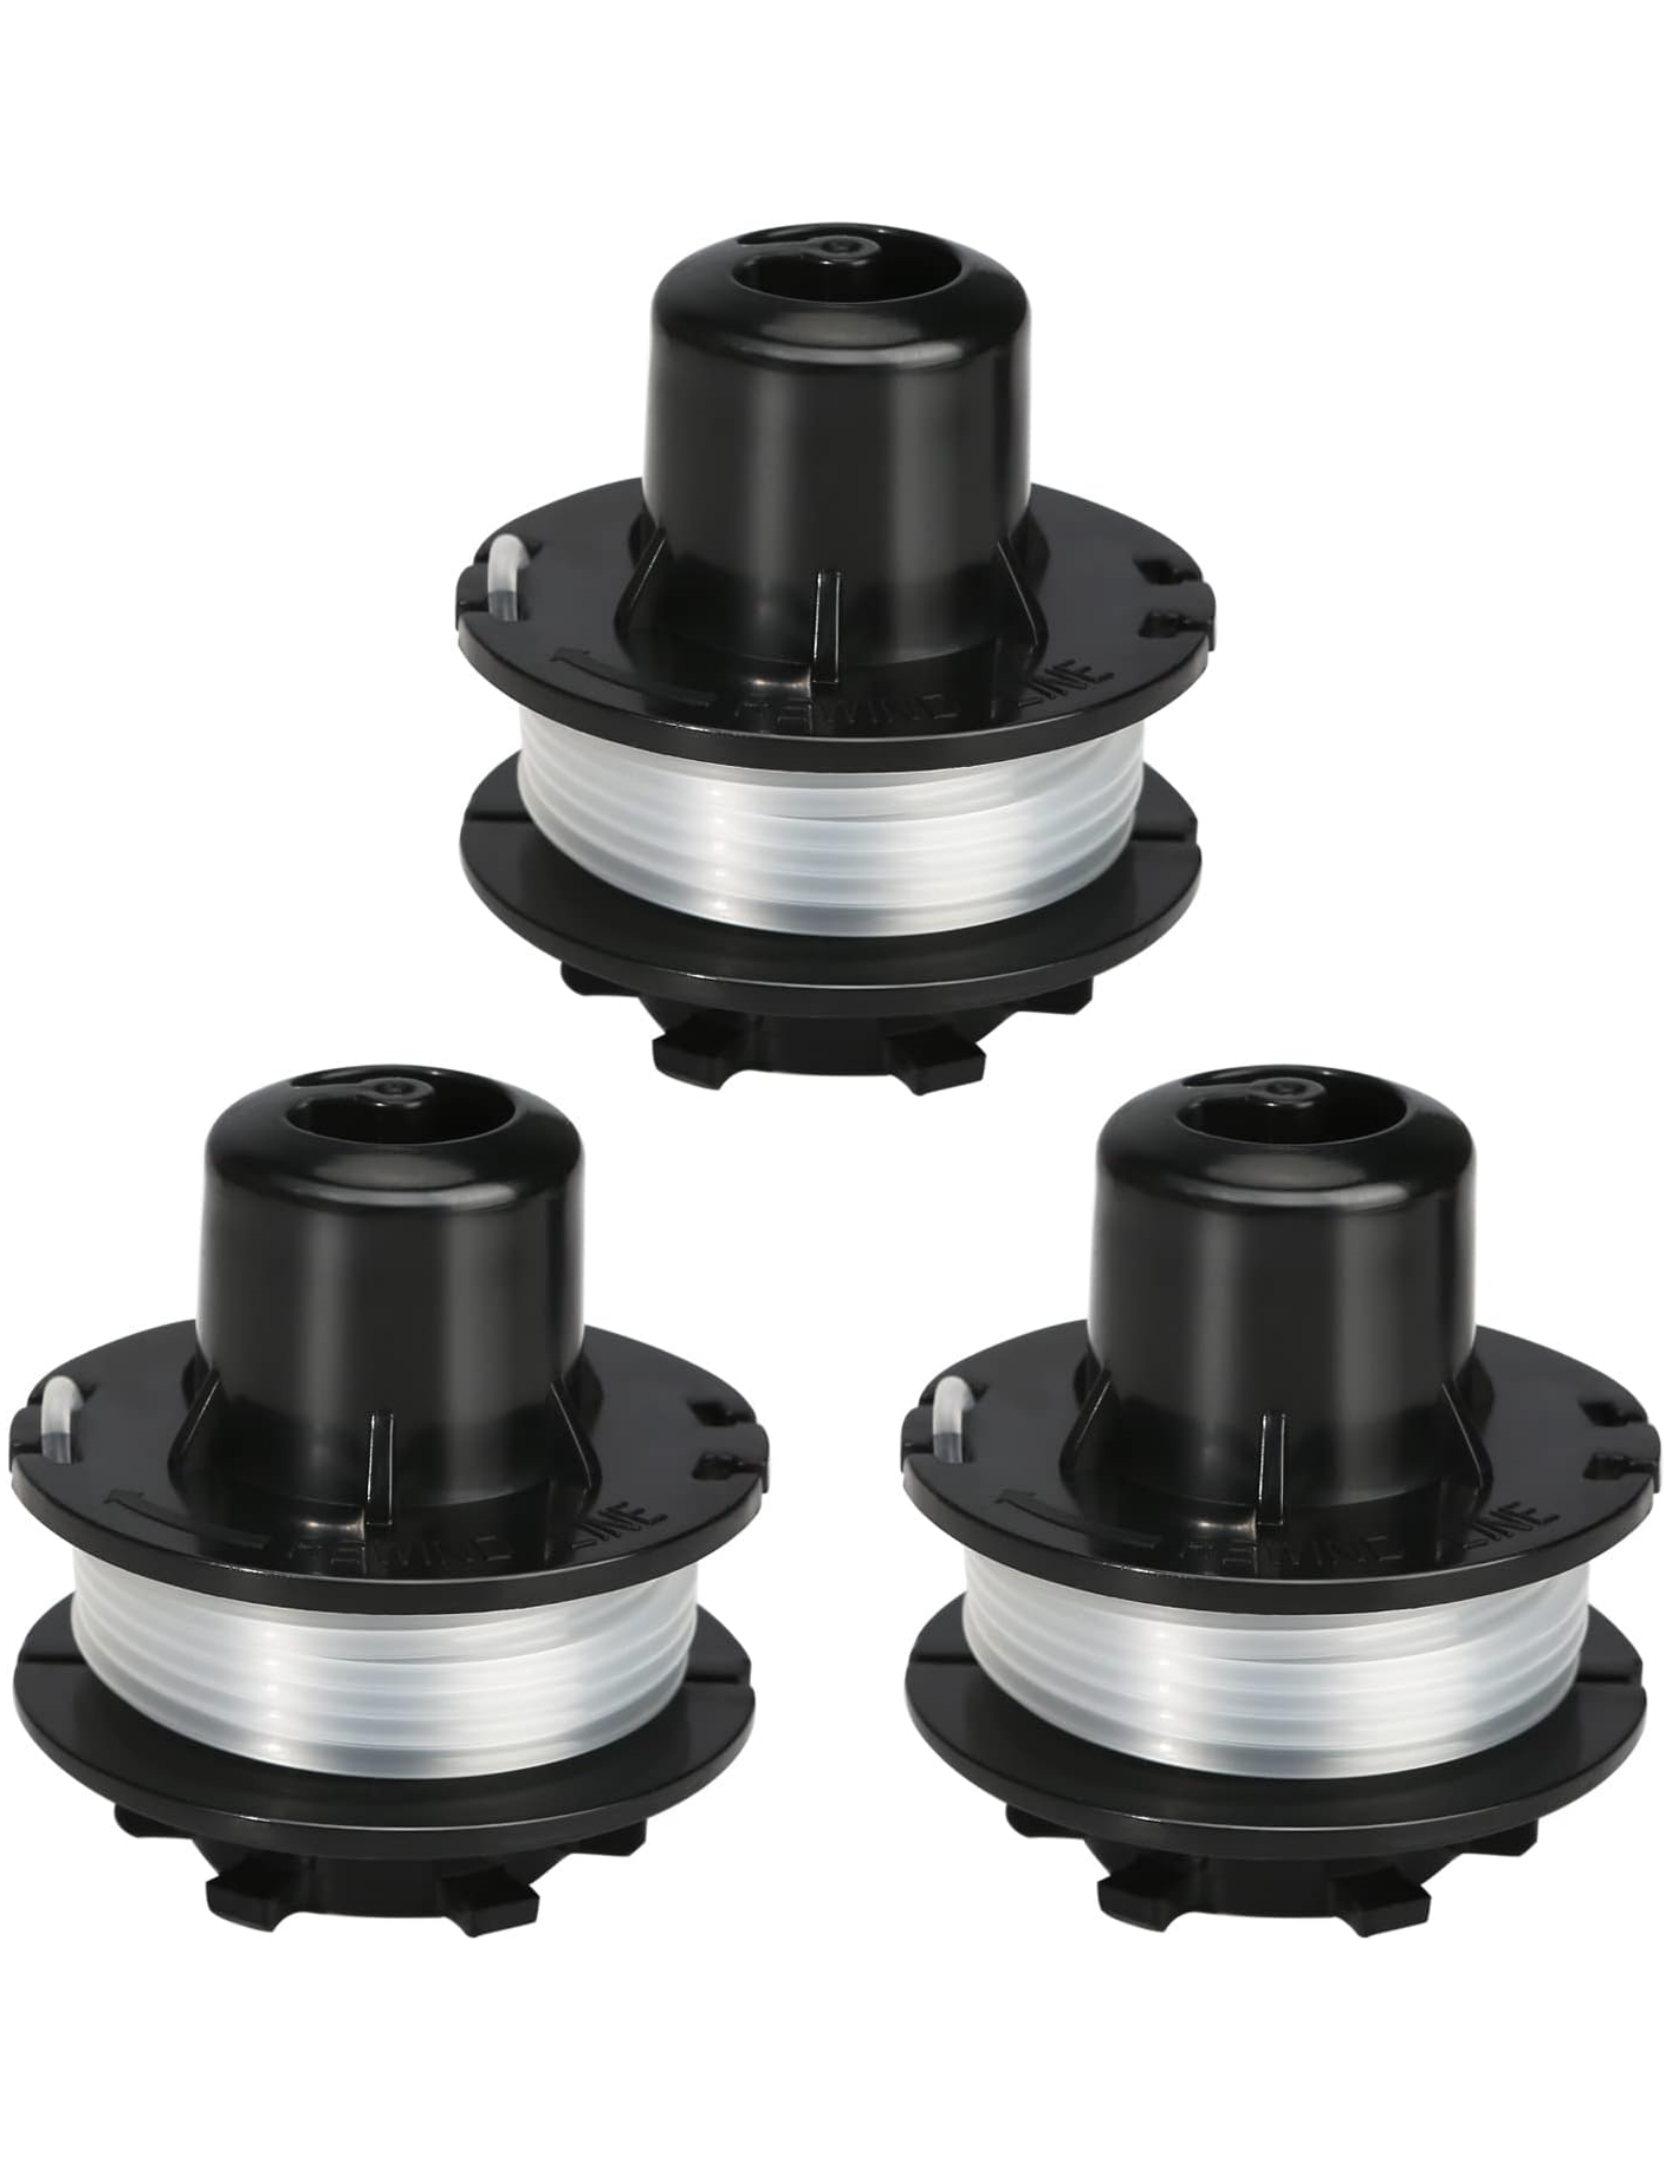 THTEN 88185 Electric Trimmer Replacement Spool Compatible with Toro 51241, 51460, 51464, 51467 0.065 Inch 10 Foot Line 3 Pack